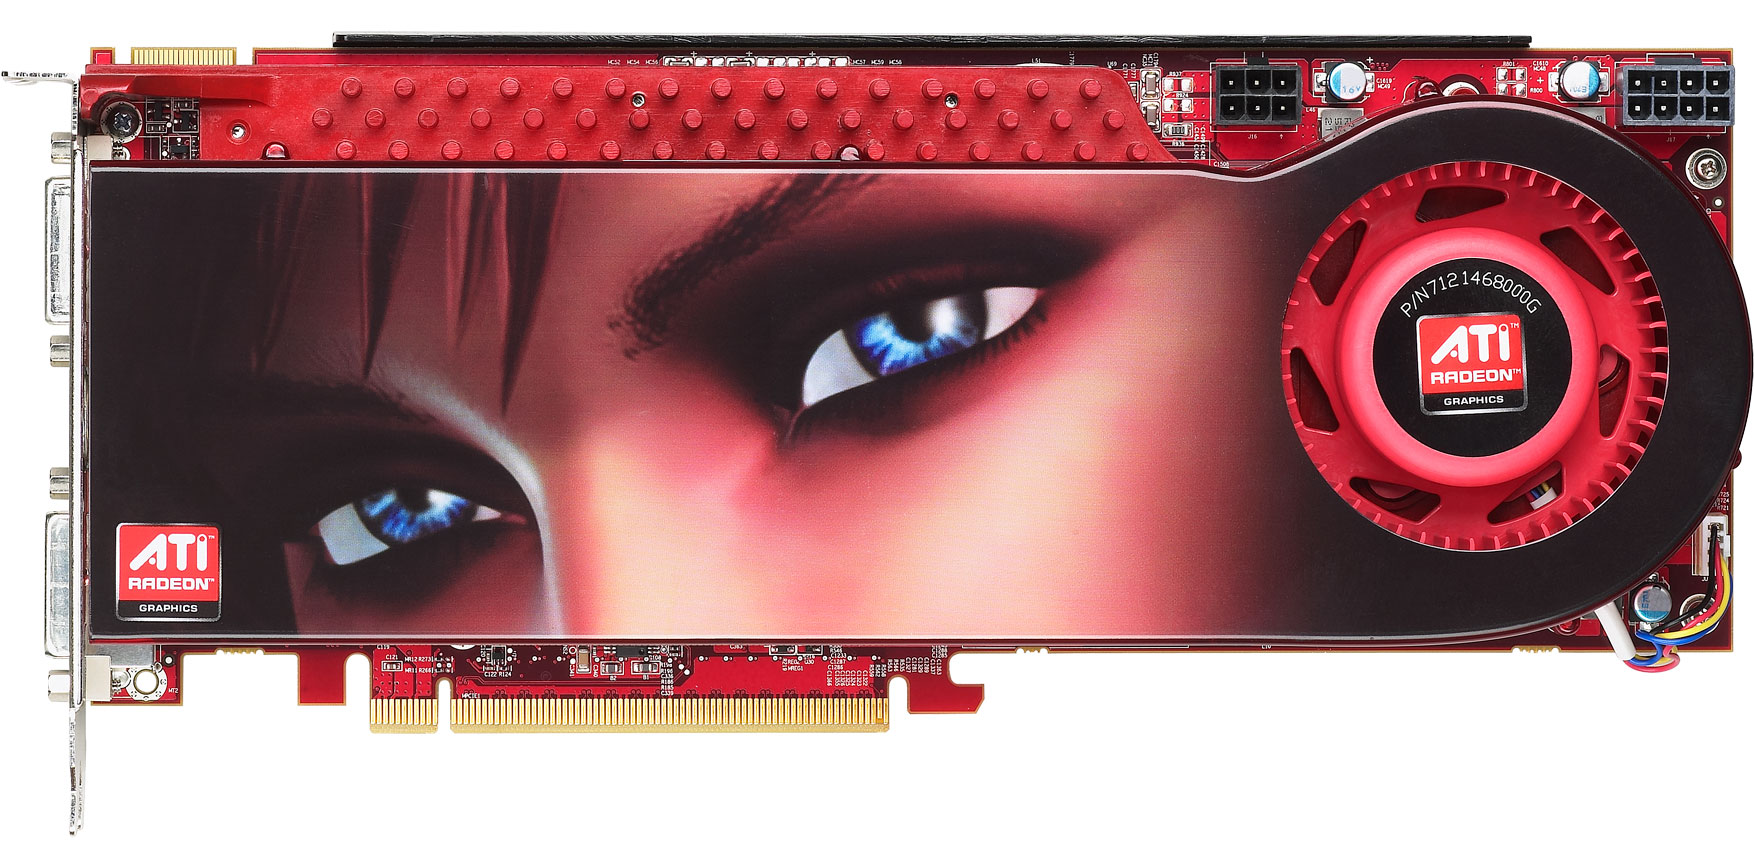 Diver Large universe Susceptible to ATI Radeon HD 3870 X2: 2 GPUs 1 Card, A Return to the High End